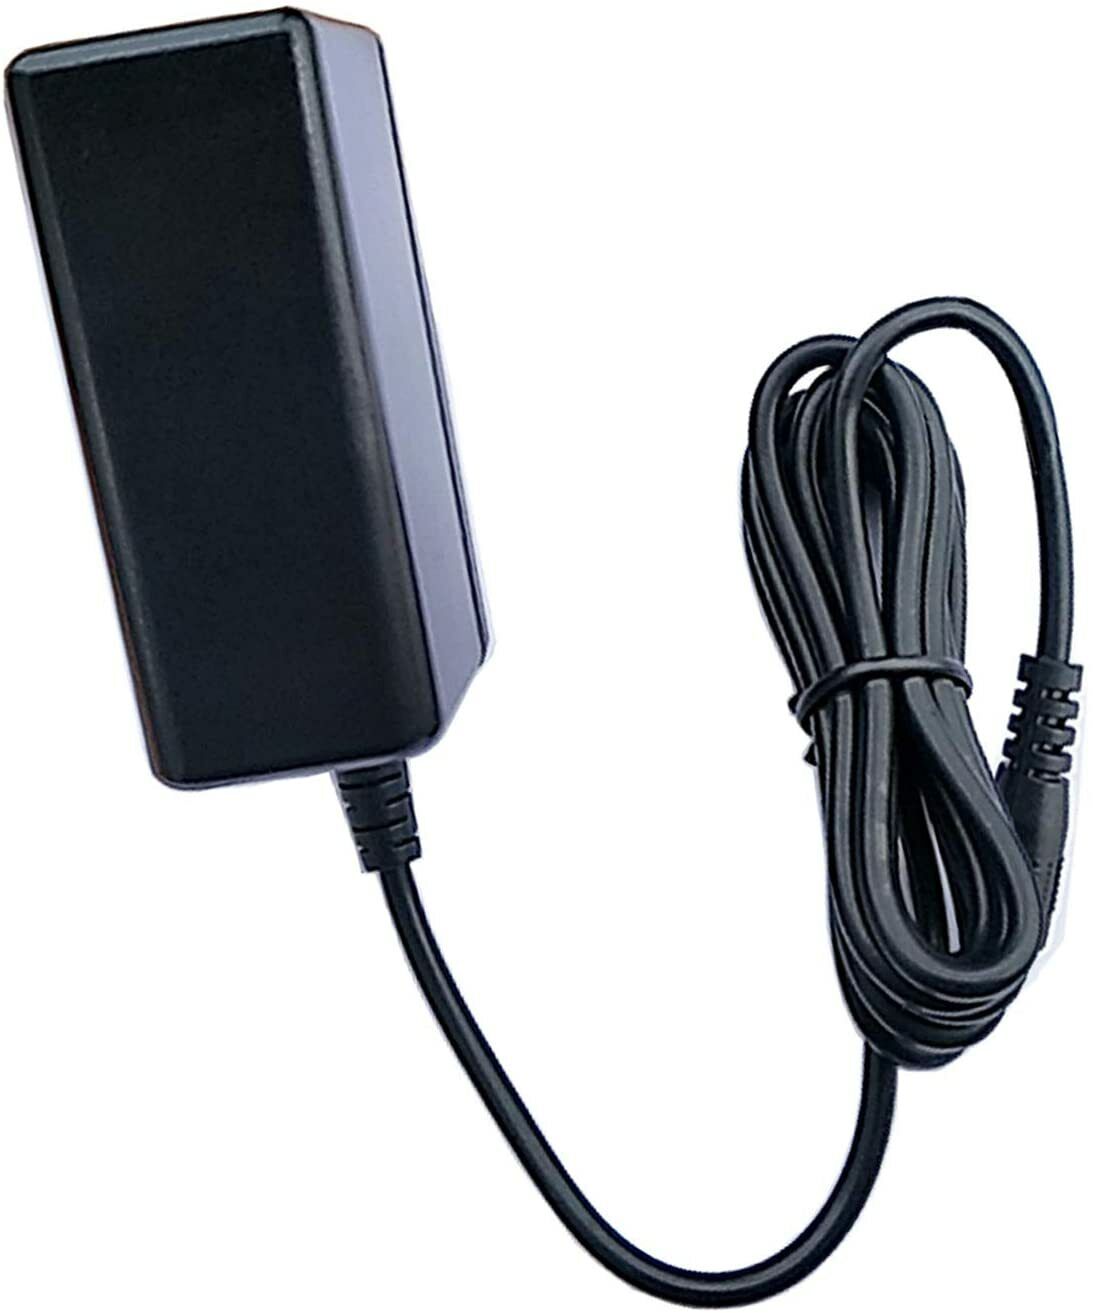 5V AC Adapter Charger for Sling Media Slingbox SOLO SB260-100 Power Supply  Cord